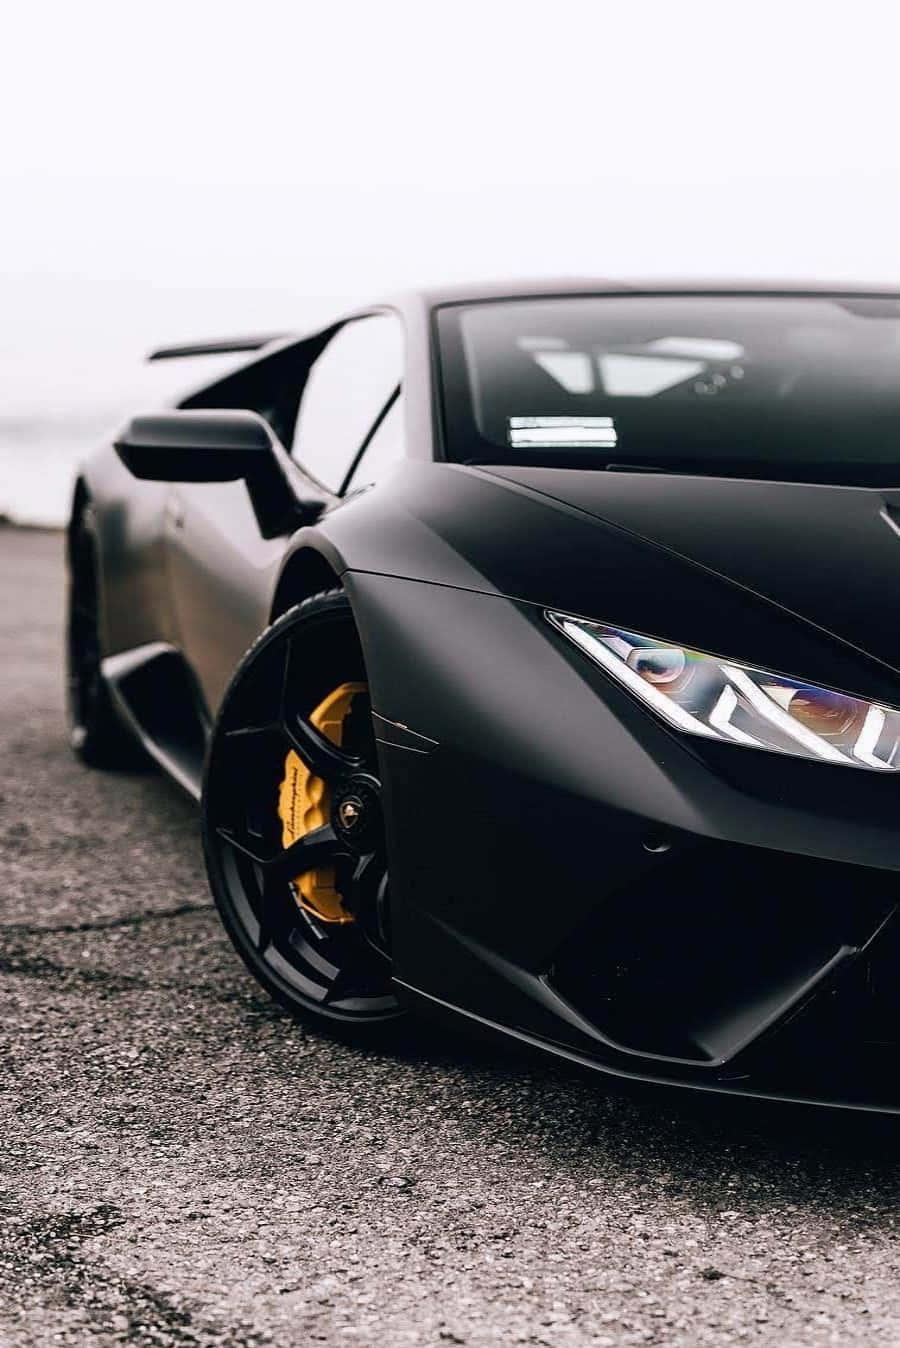 A Black Lamborghini Parked On The Side Of Road